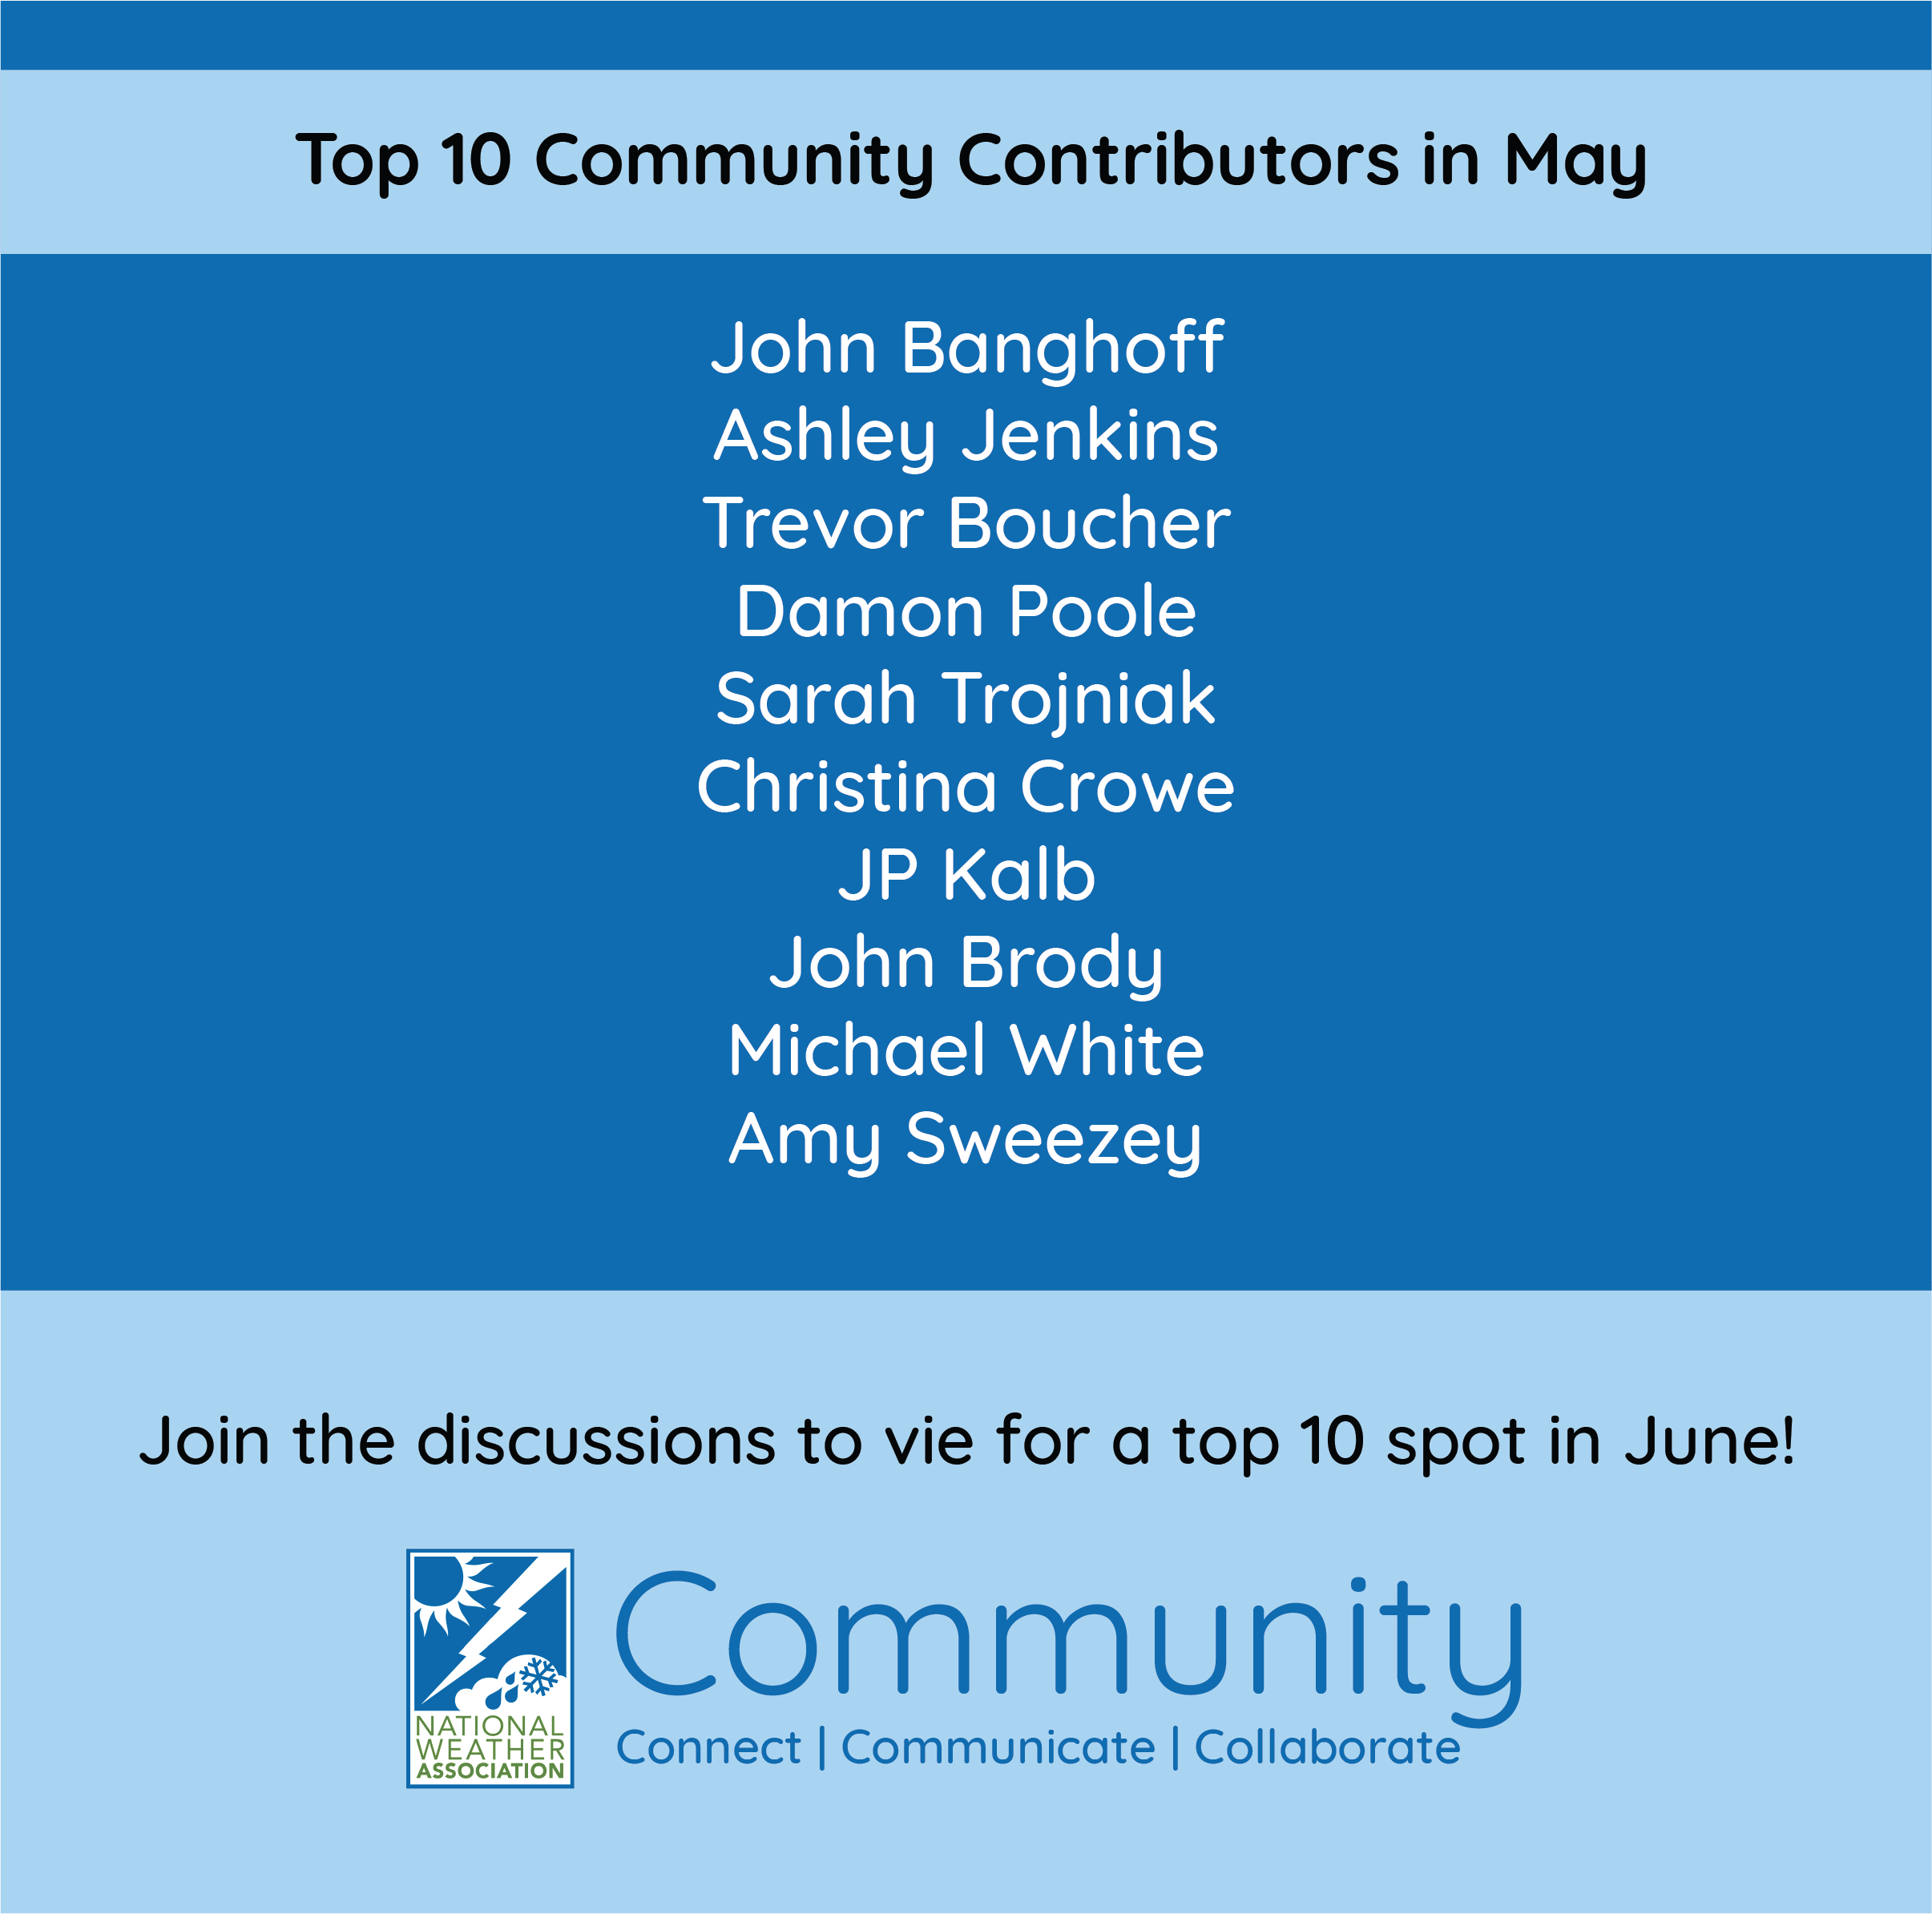 Top 10 Community Contributors in May John Banghoff Ashley Jenkins Trevor Boucher Damon Poole Sarah Trojniak Christina Crowe JP Kalb John Brody Michael White Amy Sweezey  Join the discussions to vie for a top 10 spot in June!